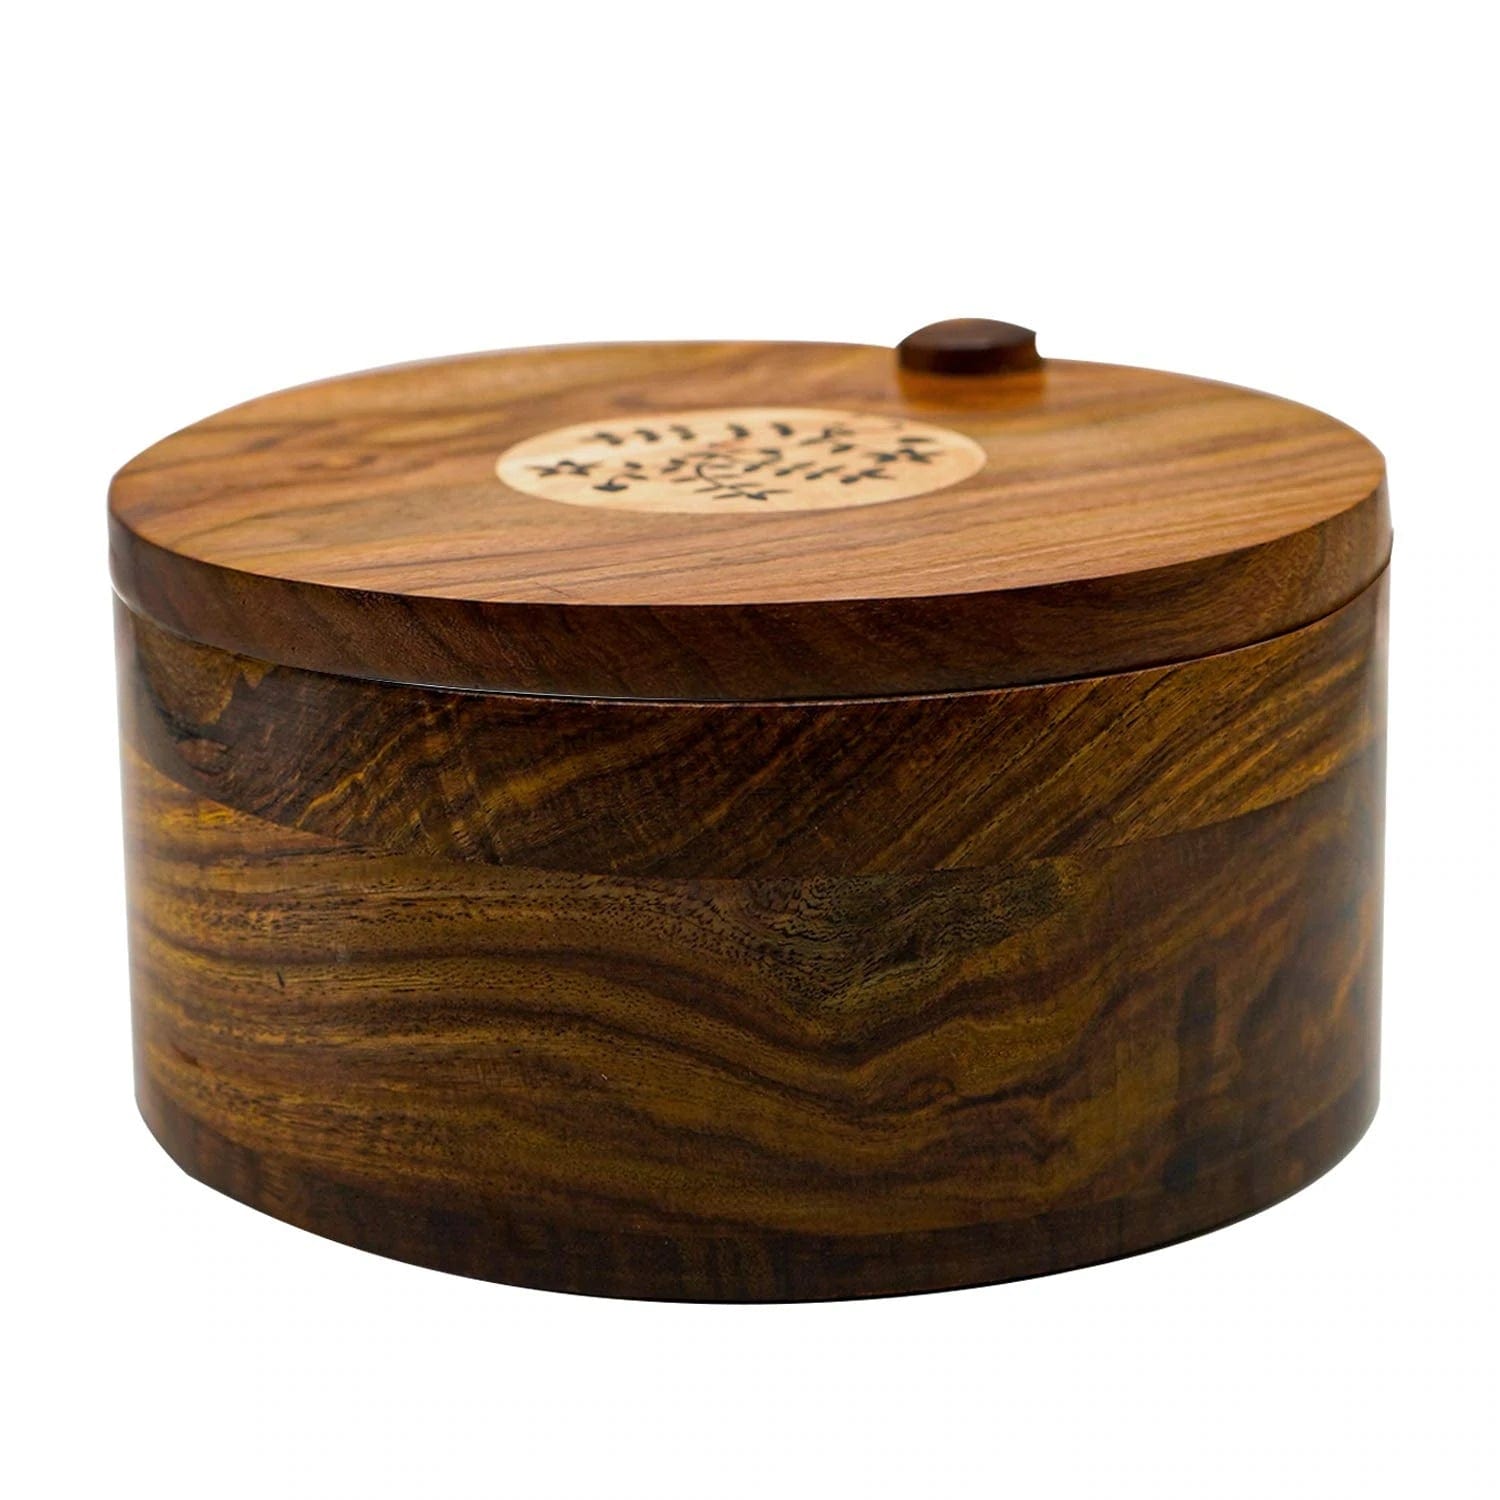 SHEESHAM WOOD CHAPATI BOX, WOODEN HOT POT ROTI DABBA WITH LID, ROTI STORAGE SERVER BASKET, CONTAINER FOR KITCHEN